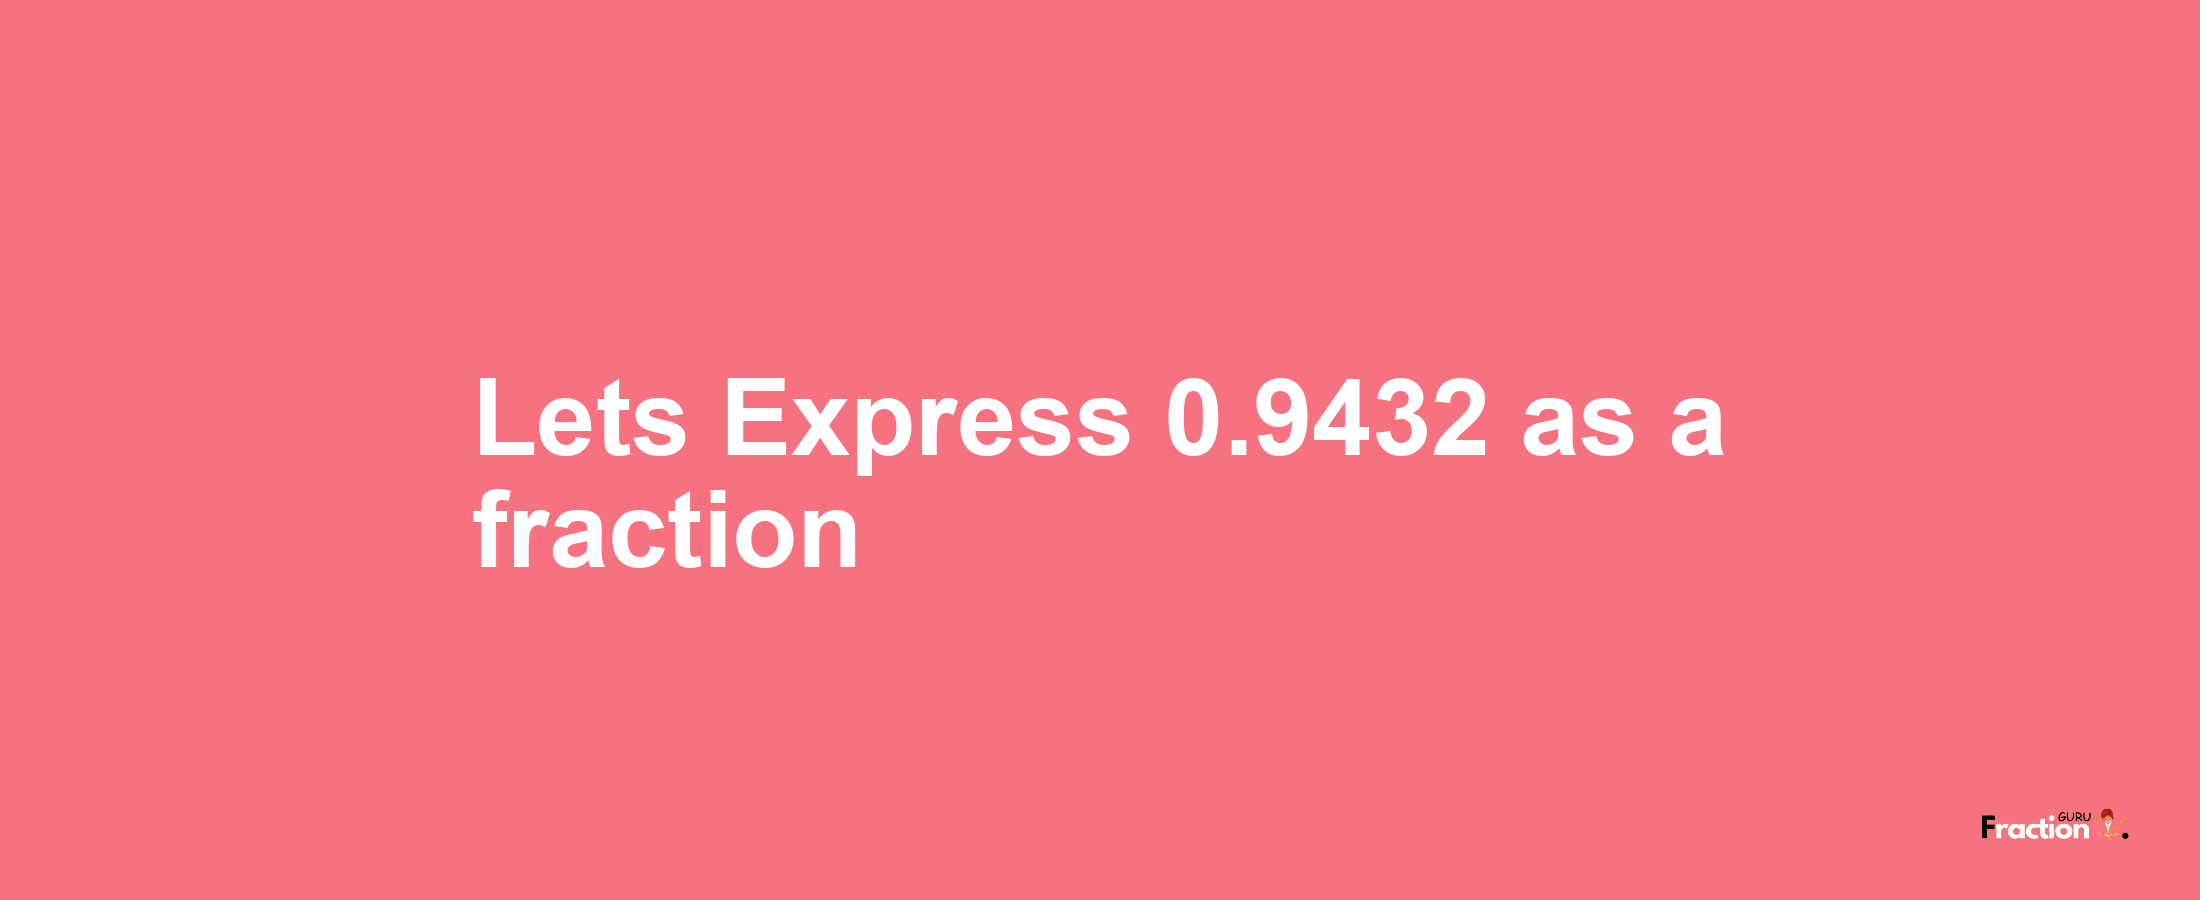 Lets Express 0.9432 as afraction